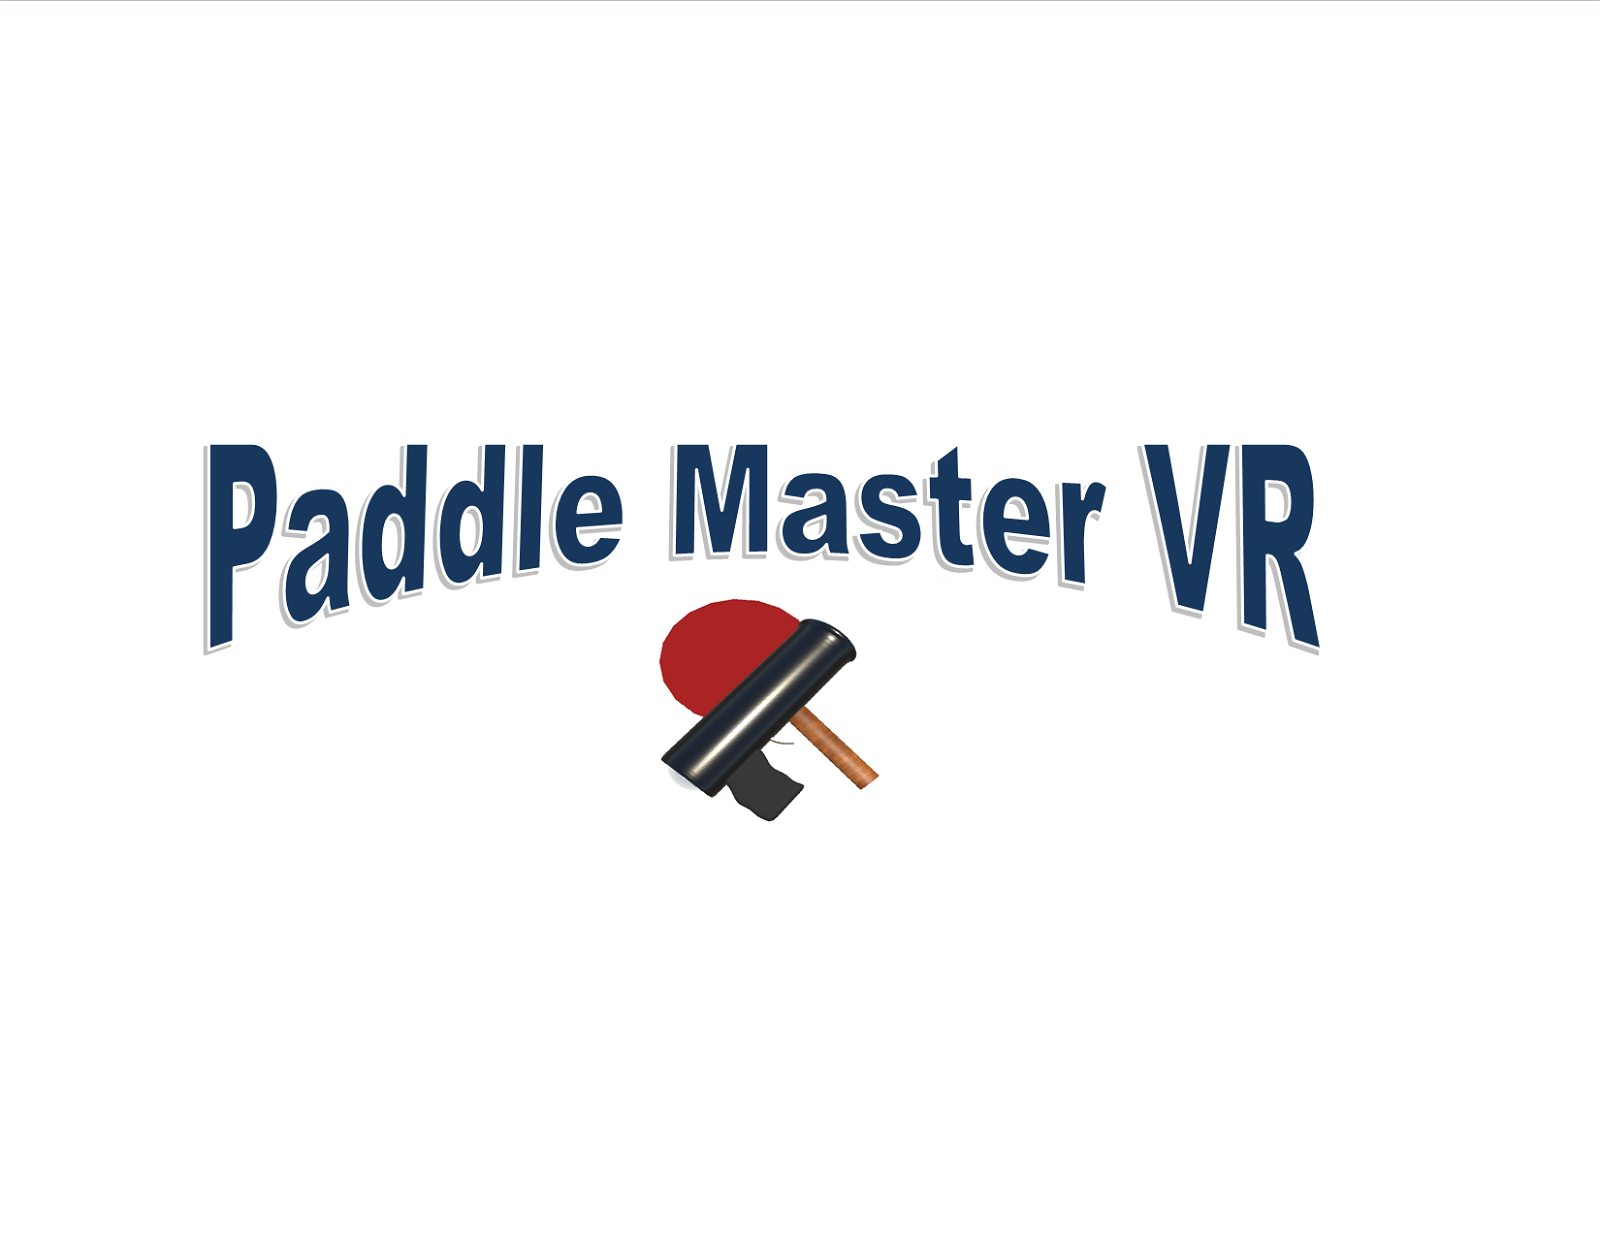 Image of Paddle Master VR